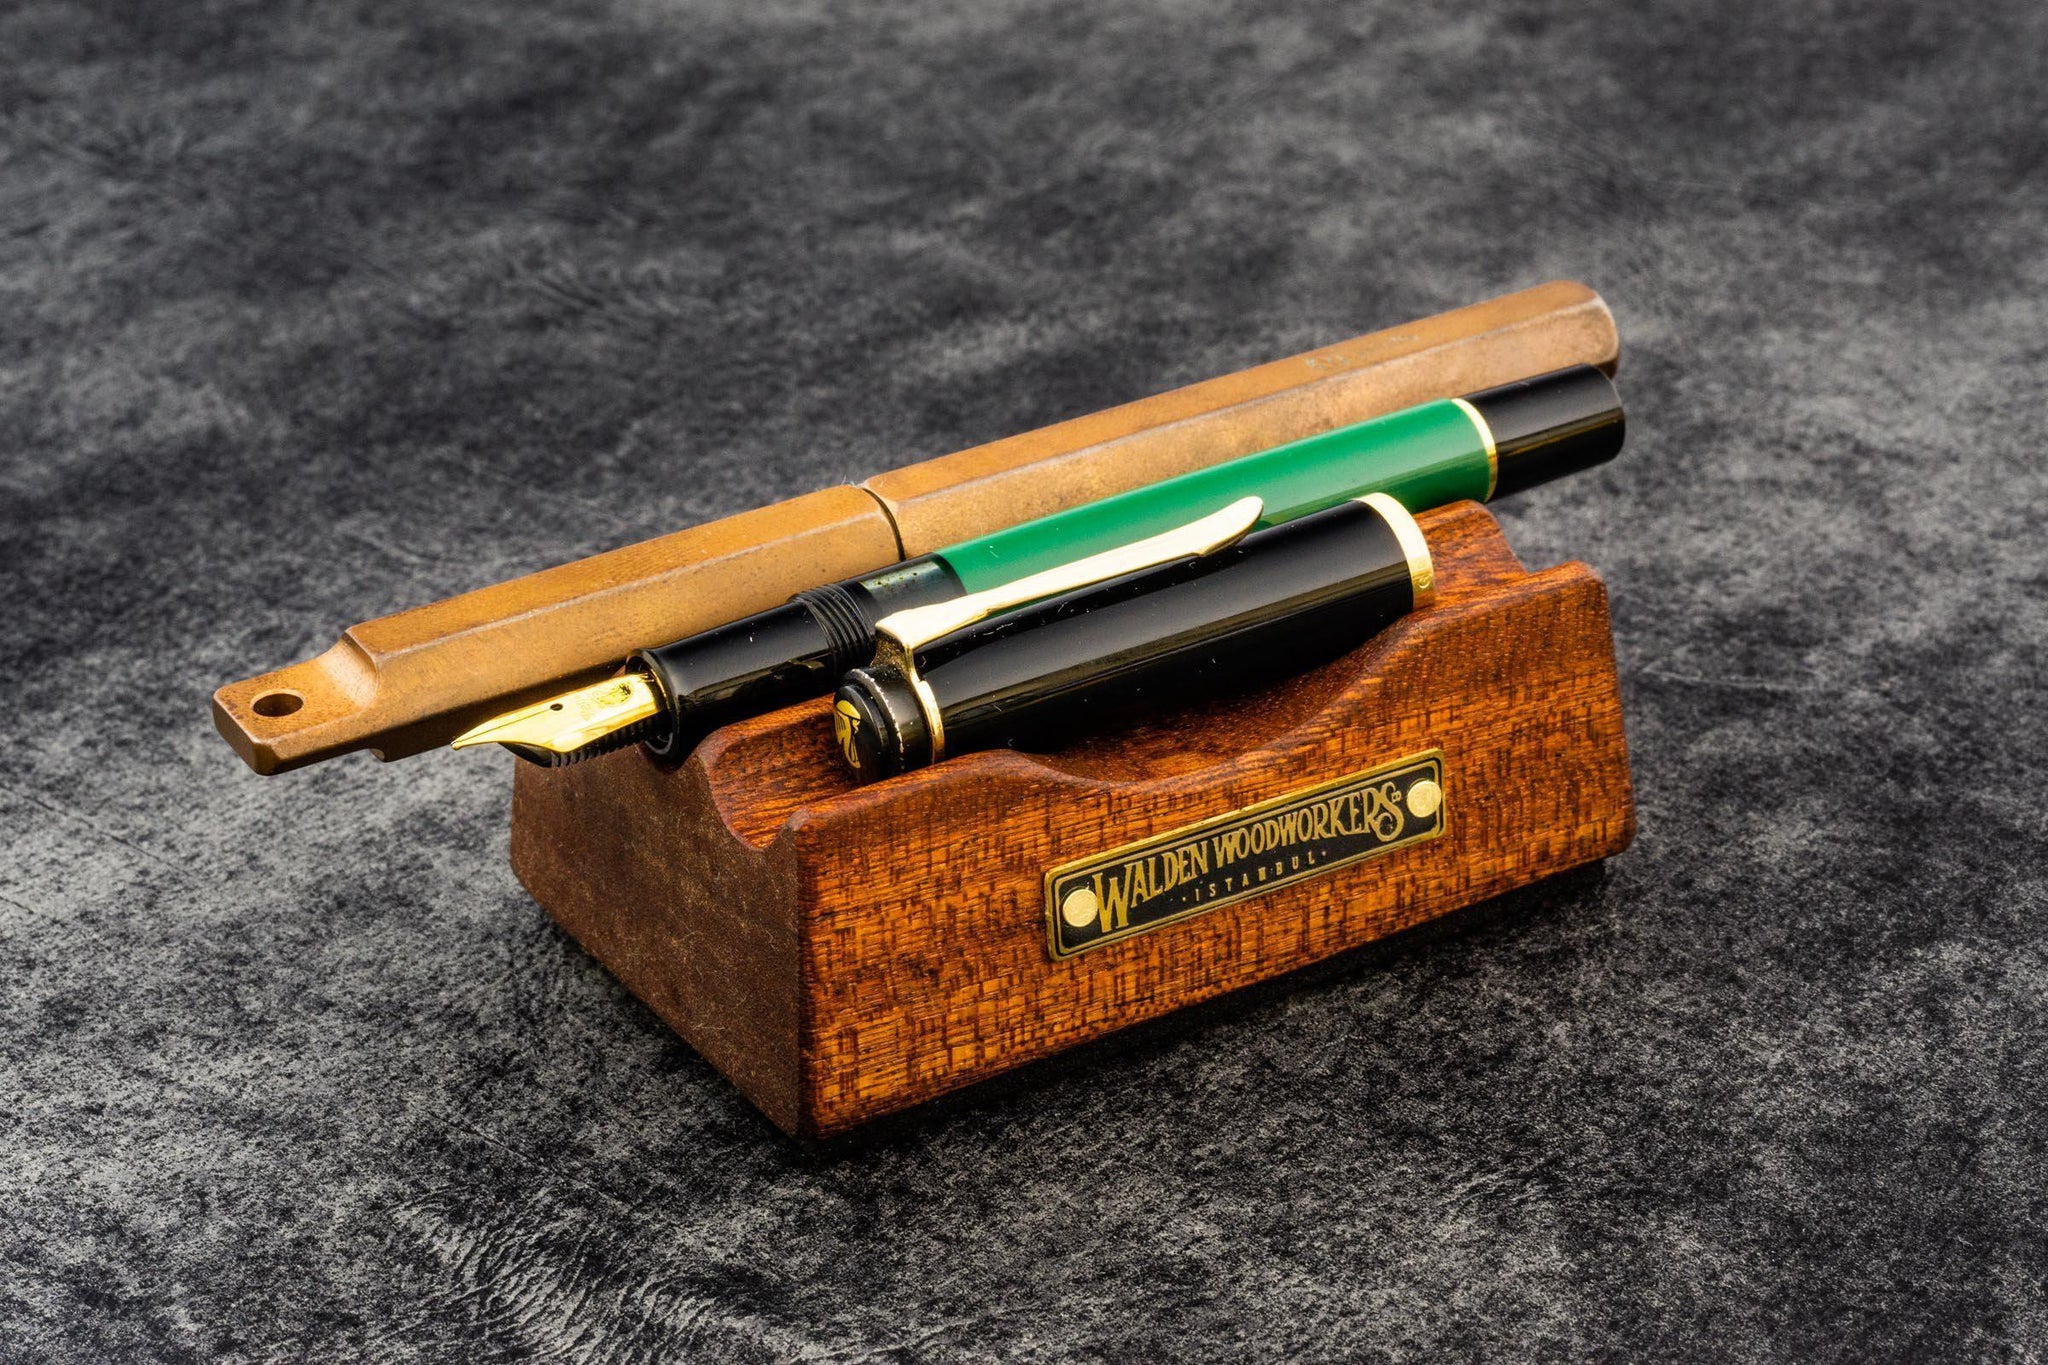 The Pen Rest' - A Mahogany Wood Pen & Brush Stand